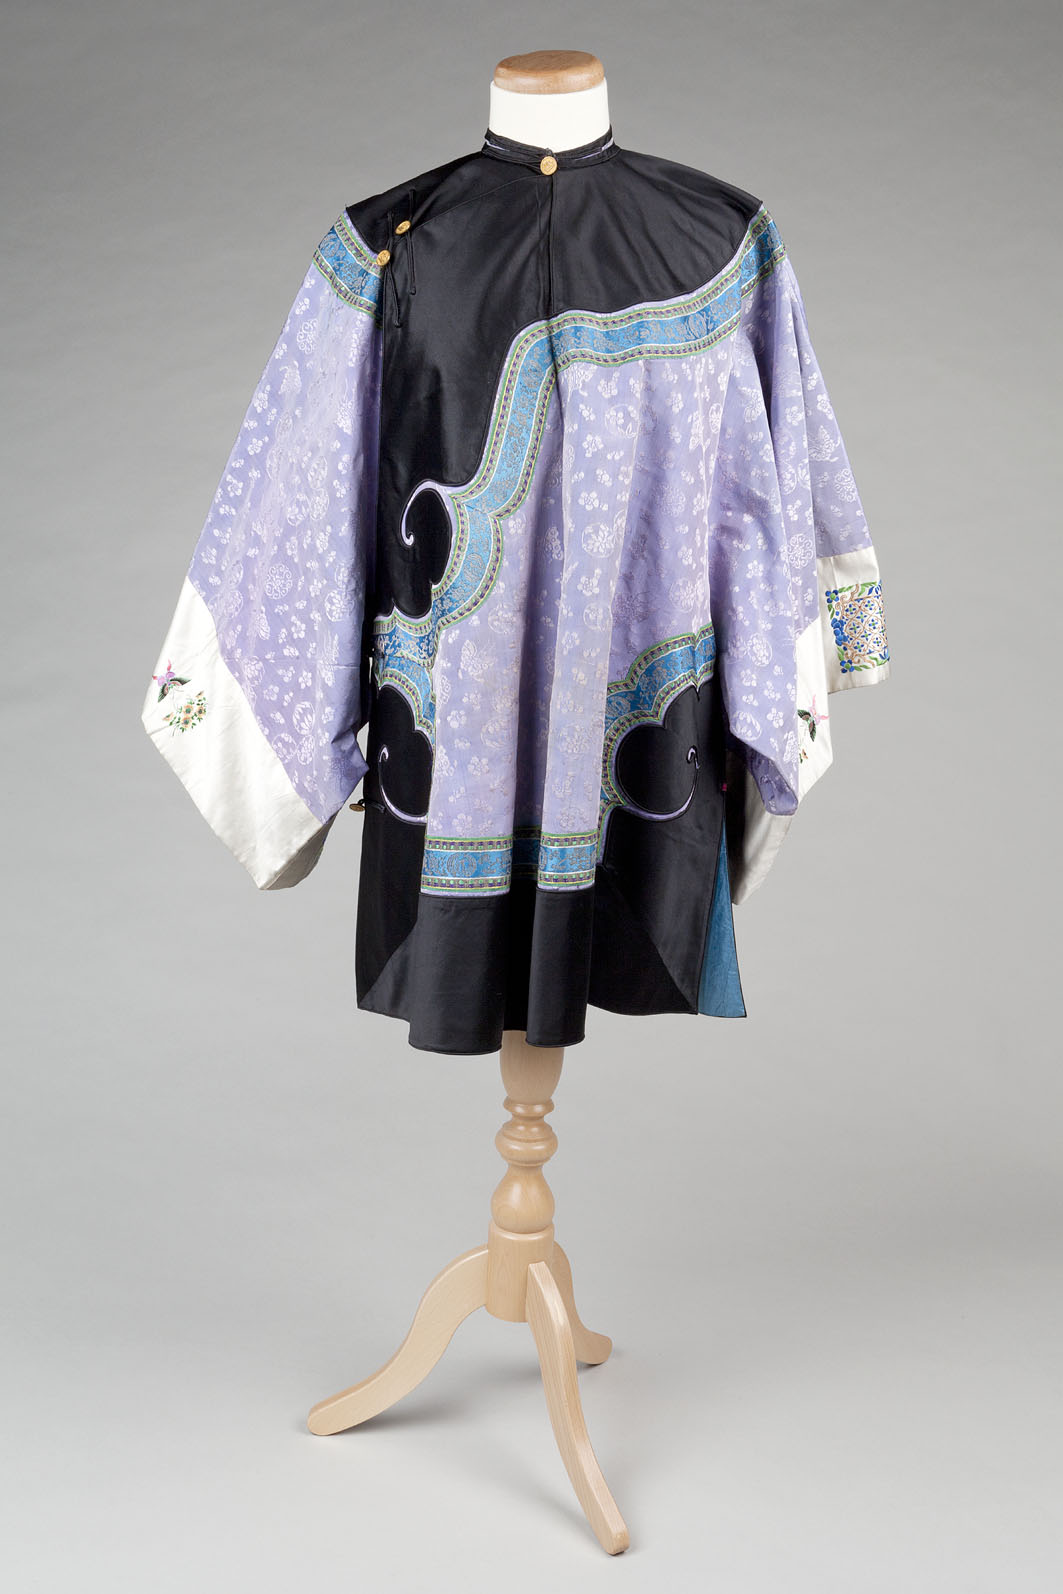 Chinese Embroidered Silk Tunic. Qing dynasty, late 19th Century. James Cromar Watt bequest, 1941. © Aberdeen City Council (Art Gallery and Museums Collections)